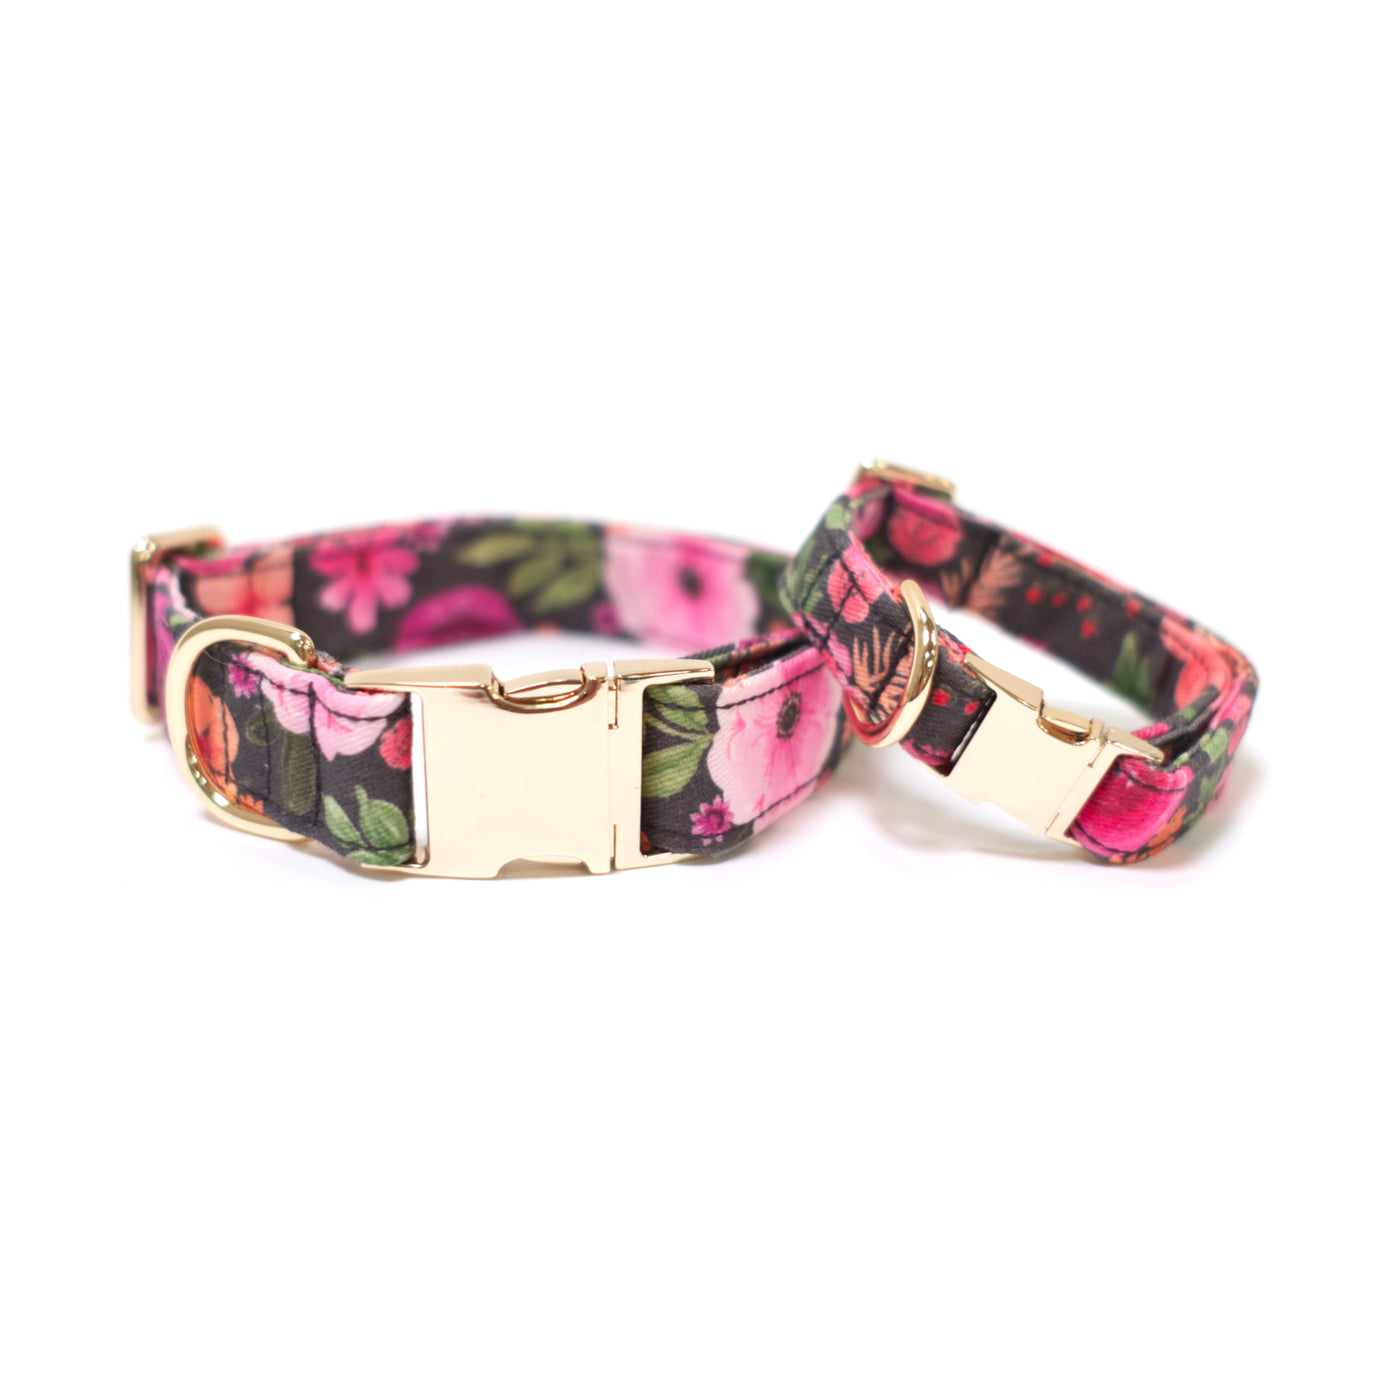 Pink floral dog collars with gold hardware in sizes medium and small